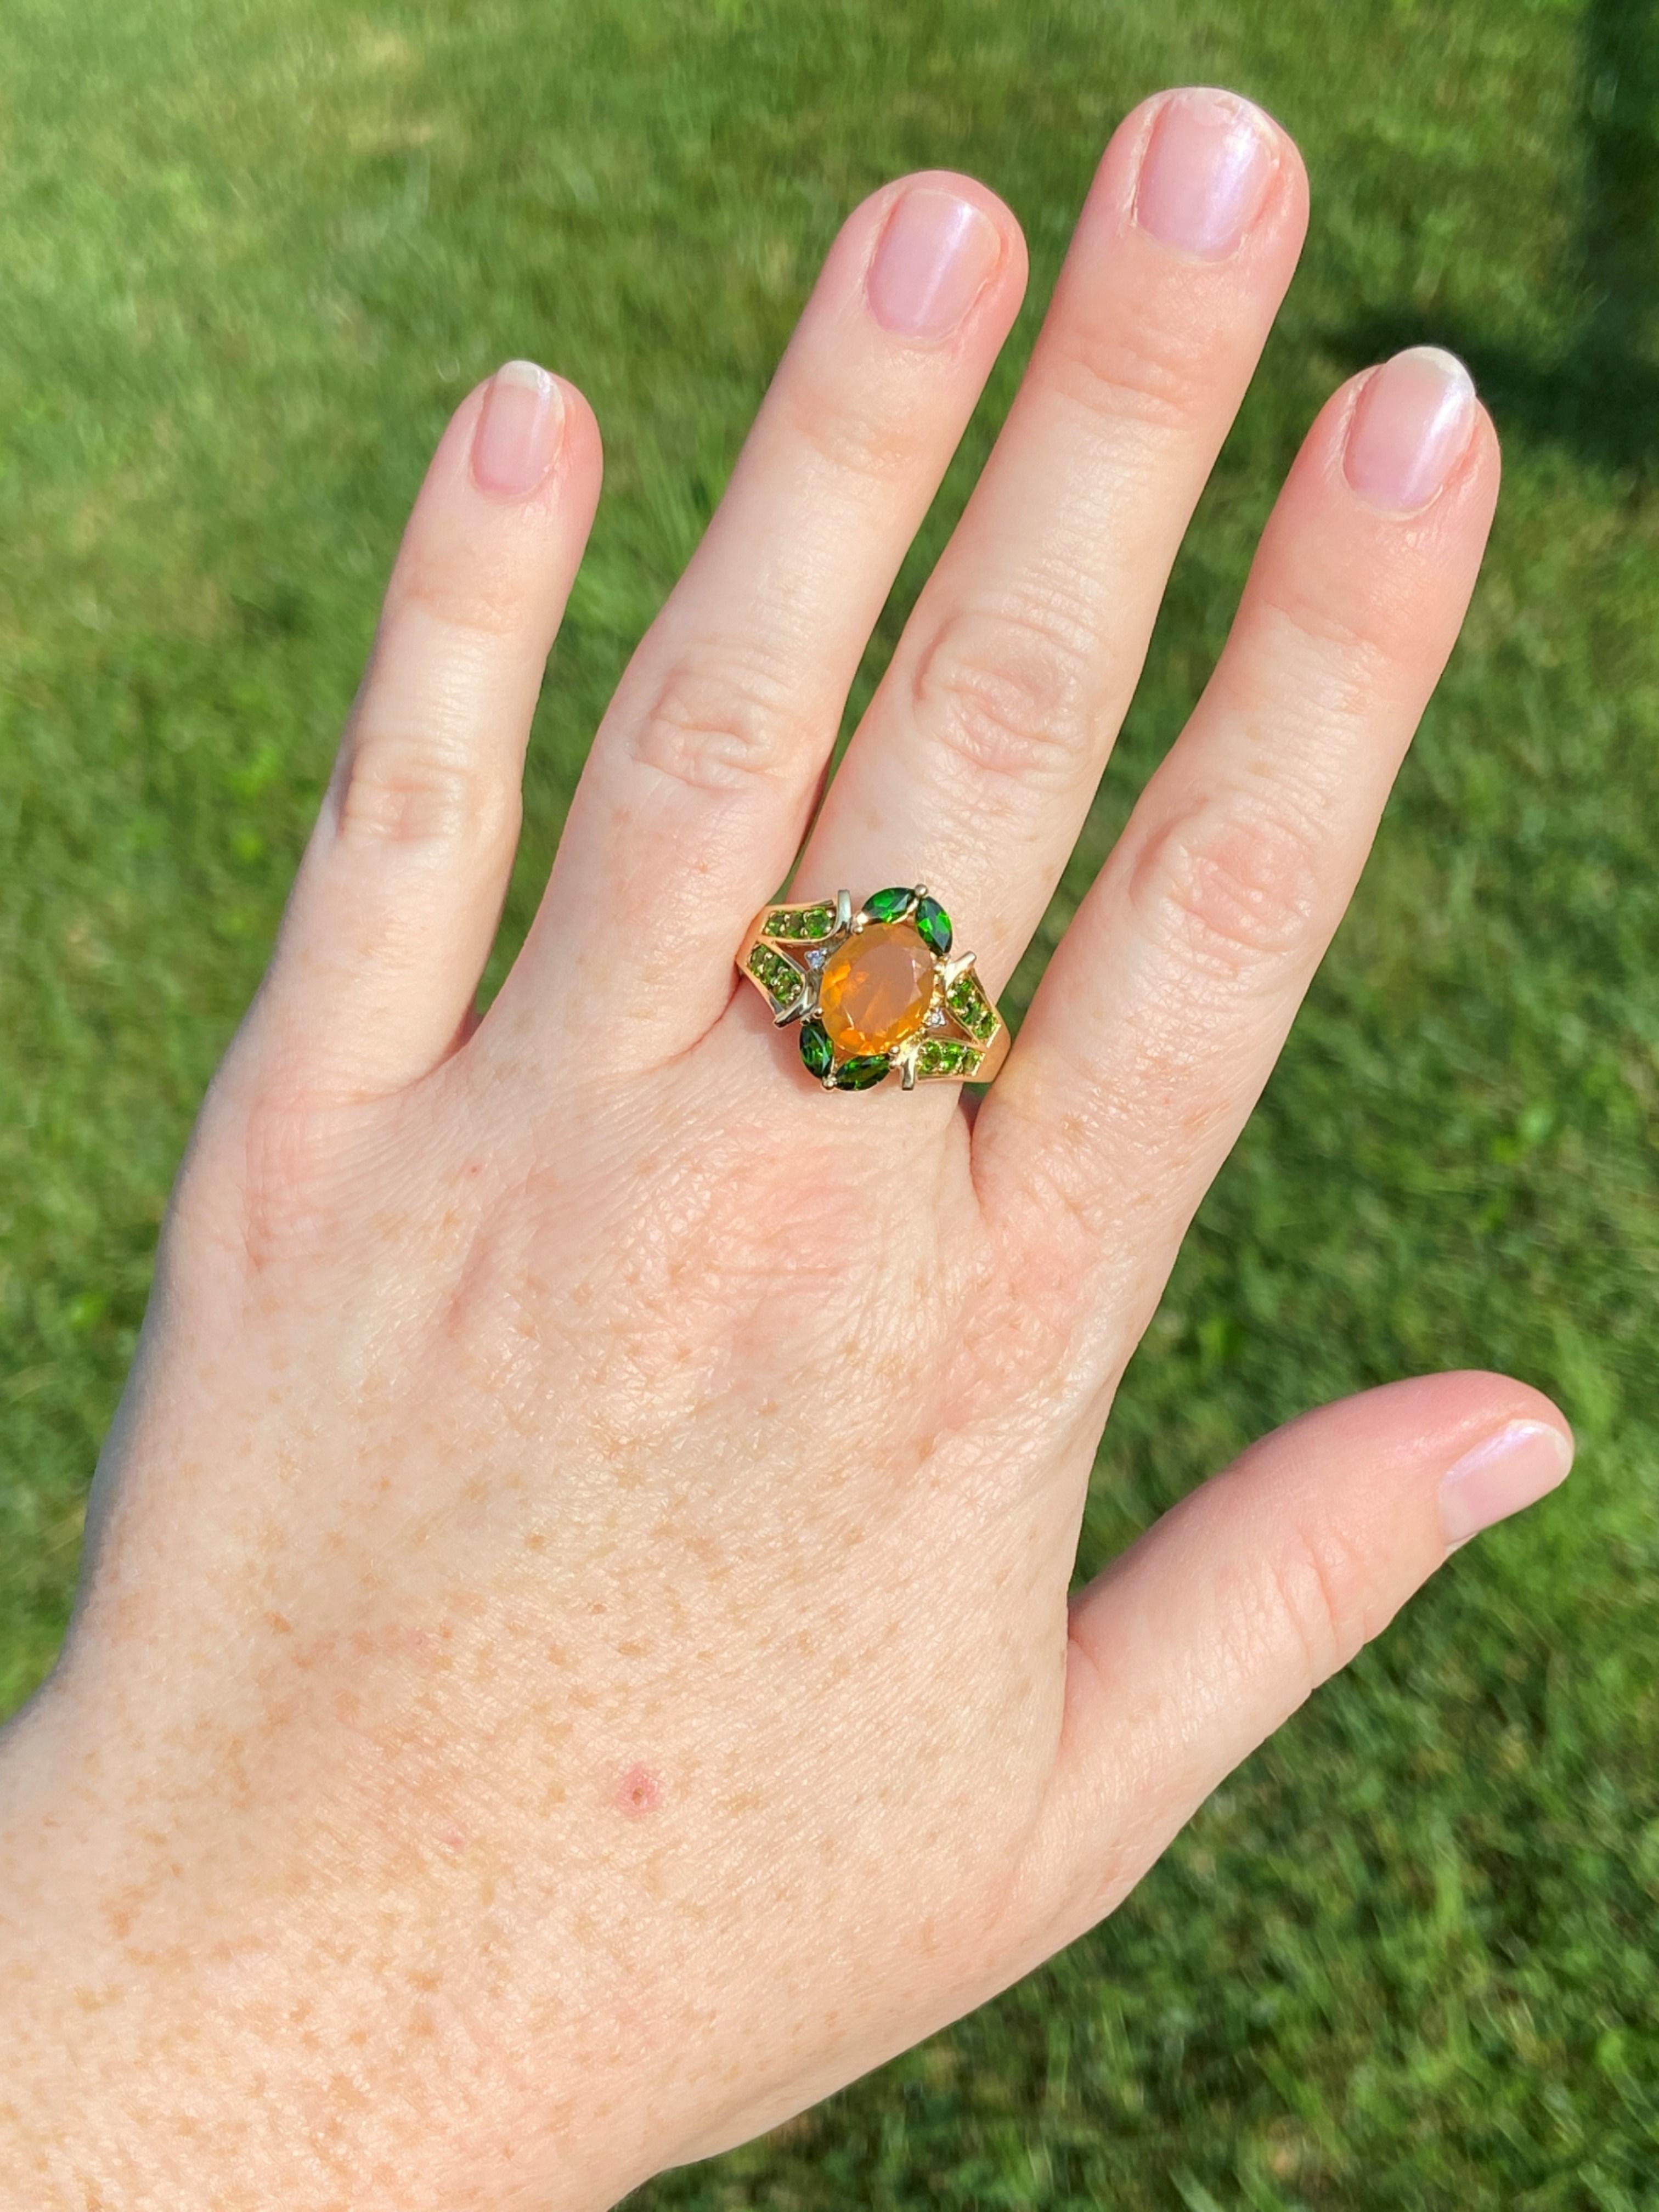 This ring features two lesser-seen but no less stunning gemstones: fire opal and tsavorite garnet. Fire opal is mostly mined in Mexico and is the more vibrant option for those with an October birthday. That watery look that fire opals have make them